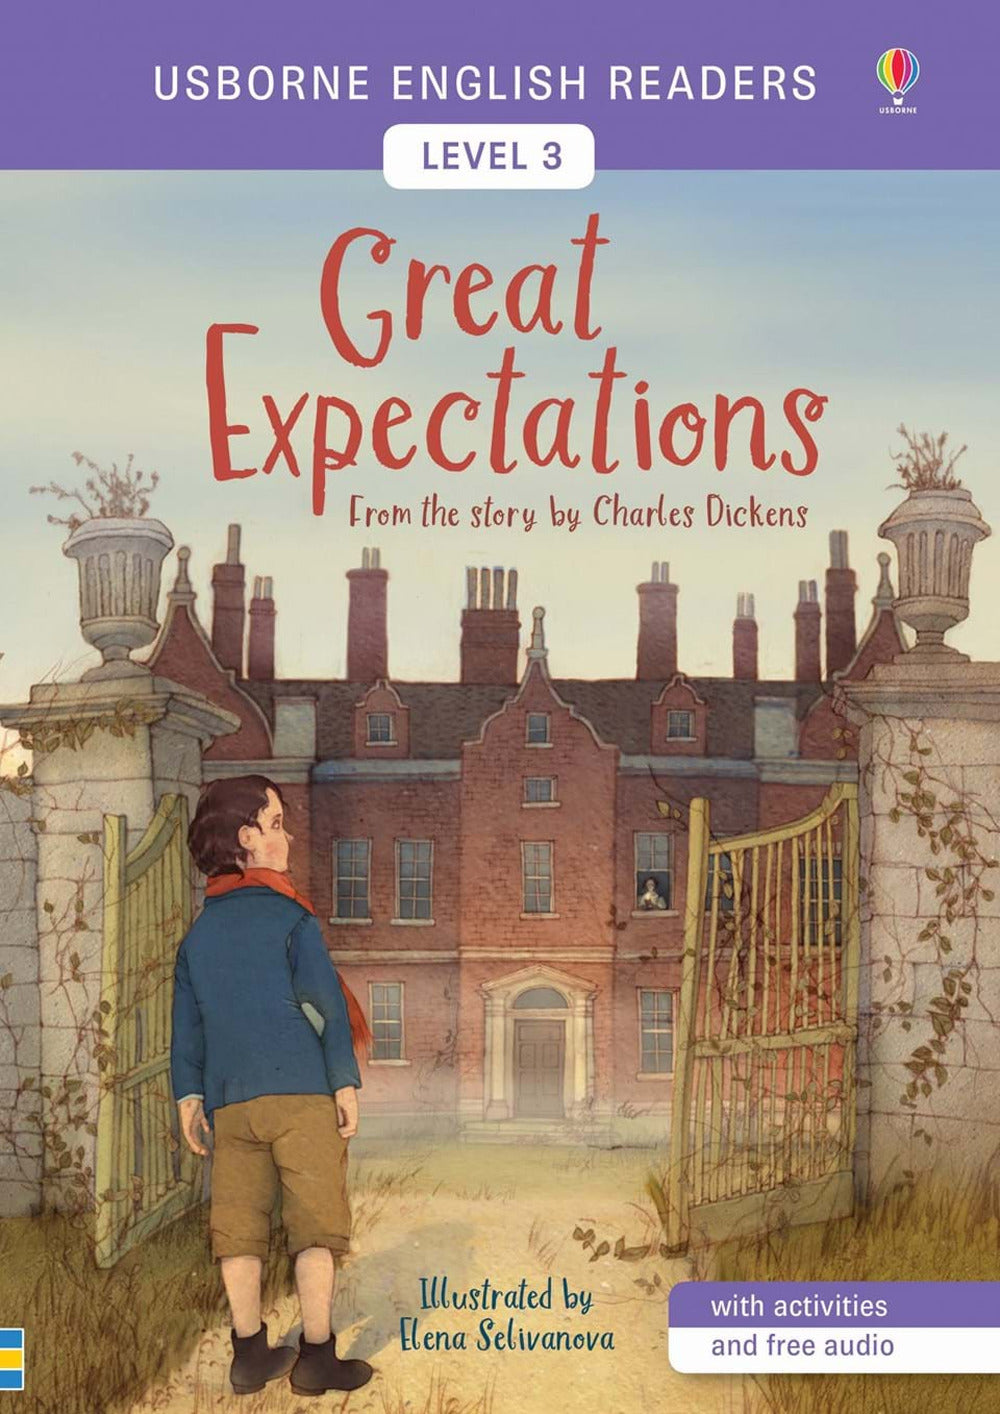 Great Expectations from the story by the Charles Dickens. Level 3.